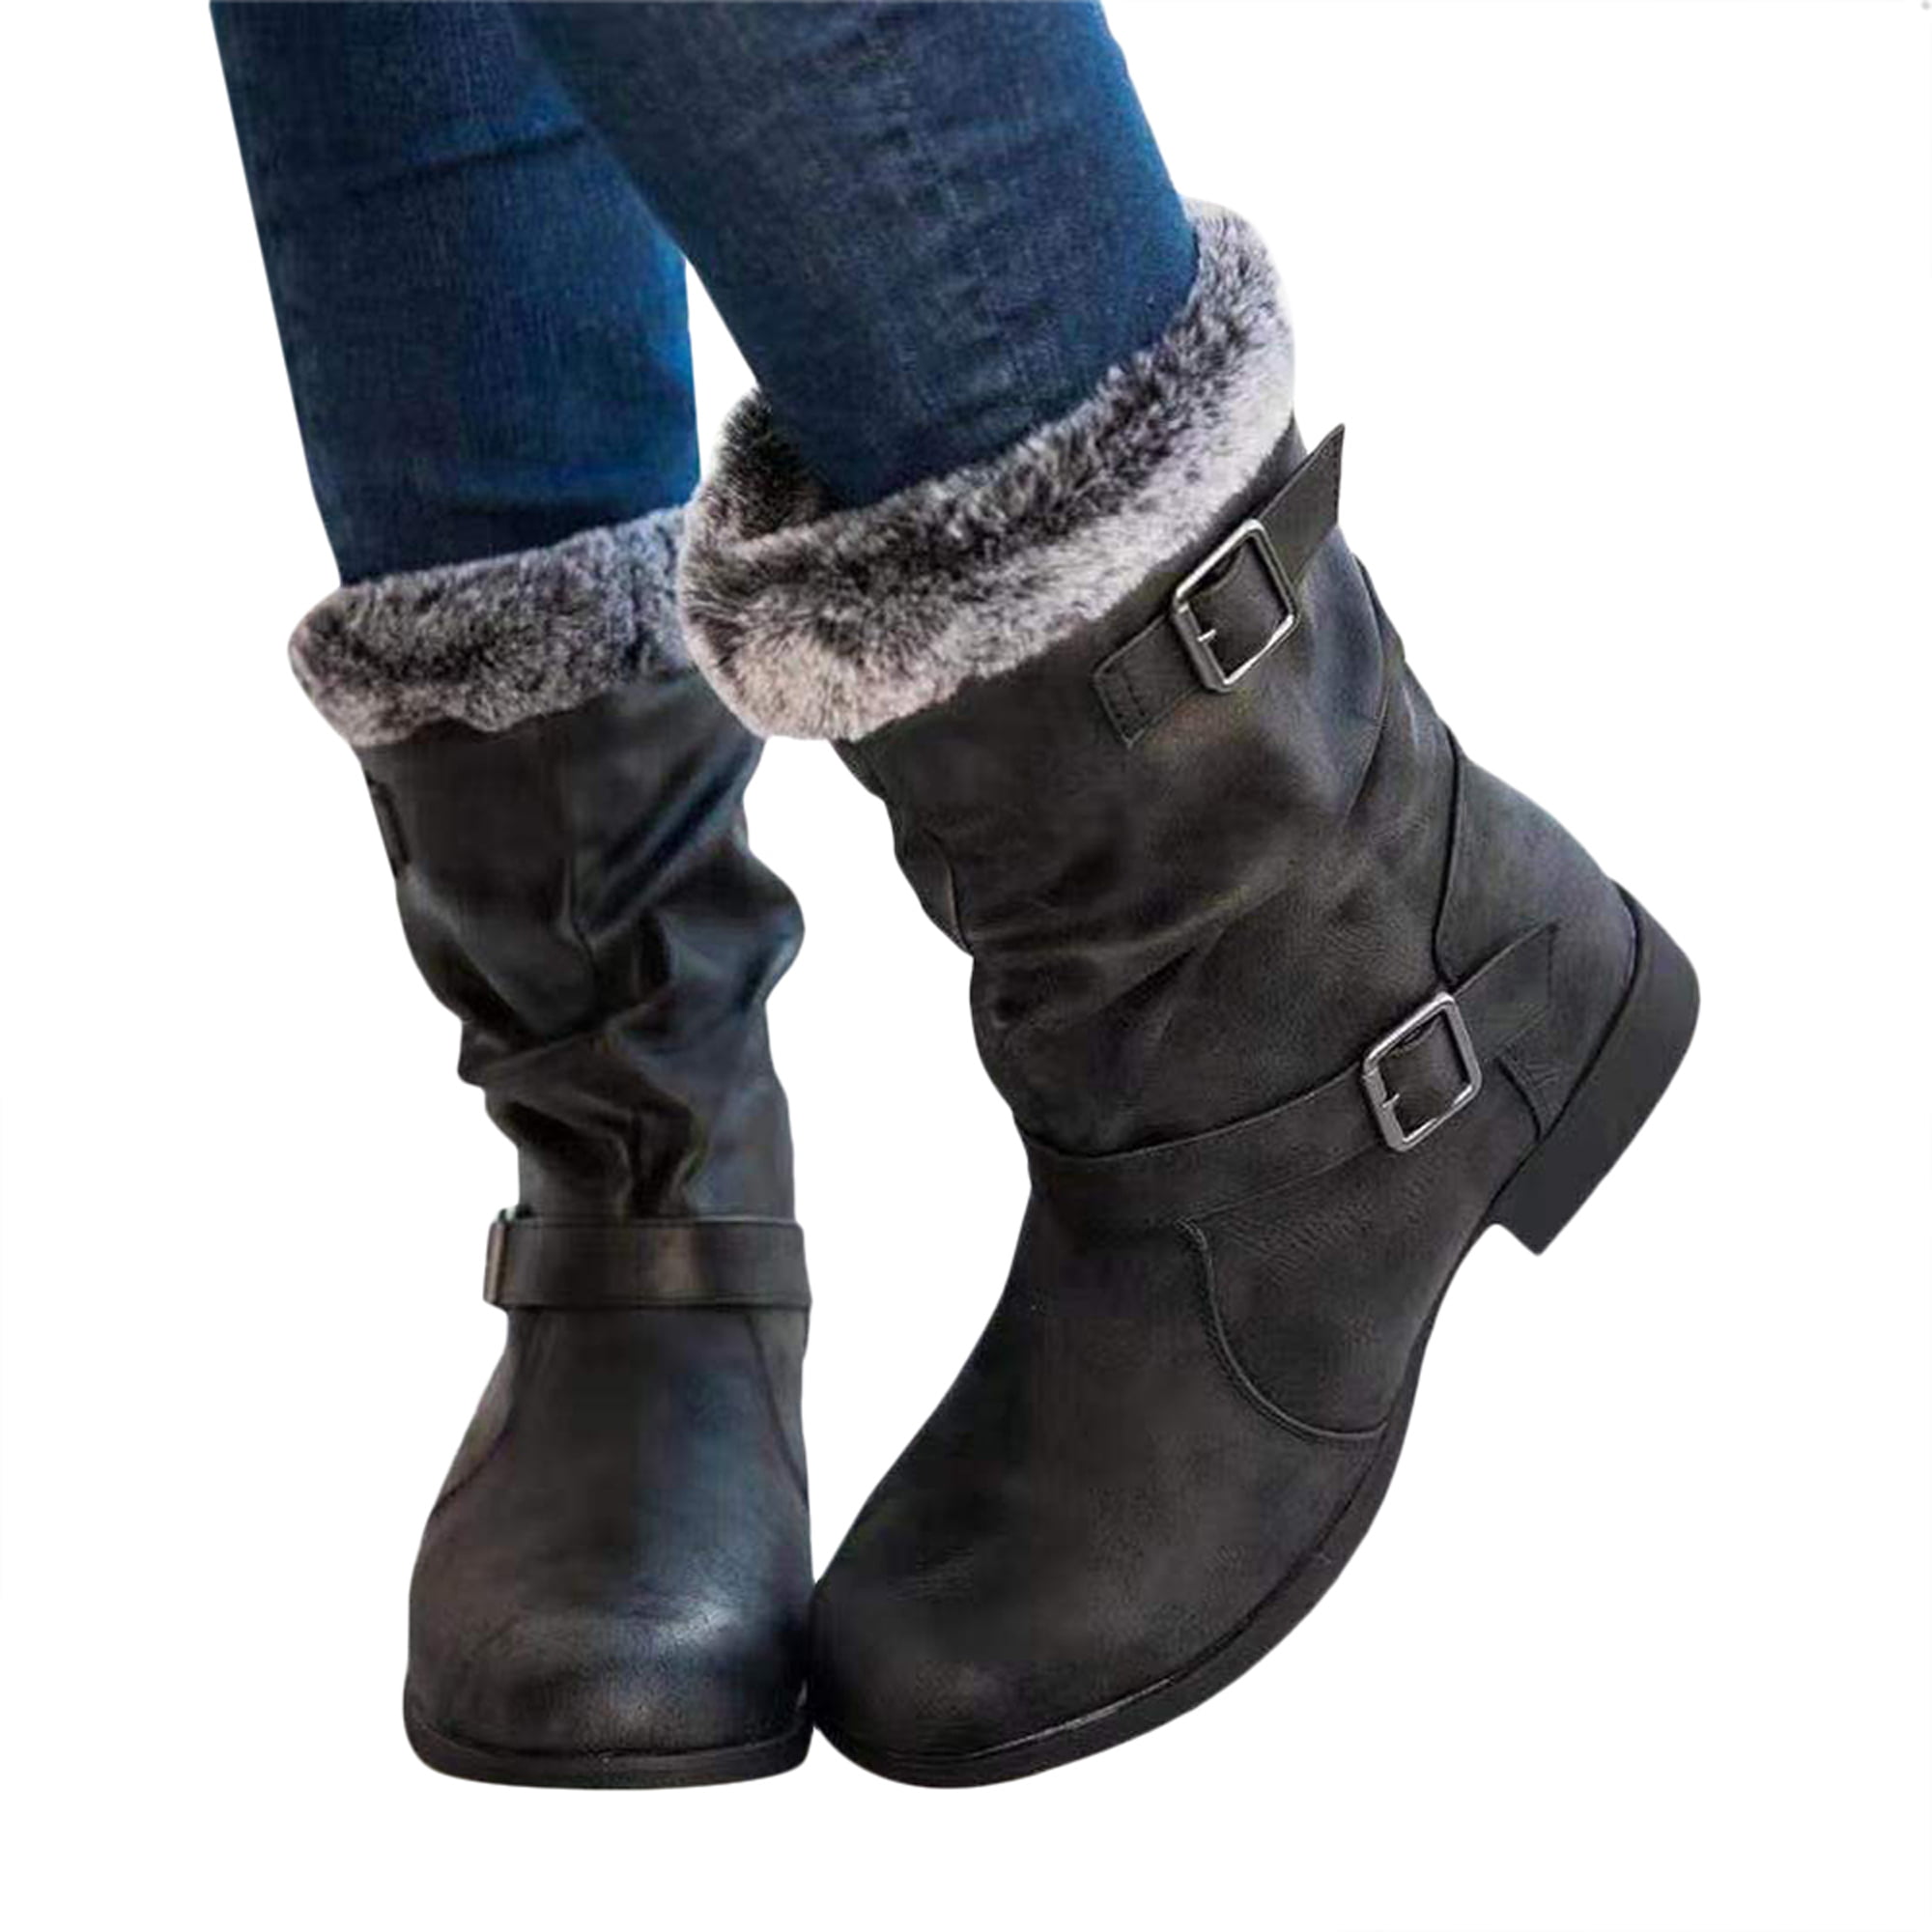 Women Winter Warm Snow Boots Low Mid Heel Buckle Ankle Boots Trainers Shoes Size 